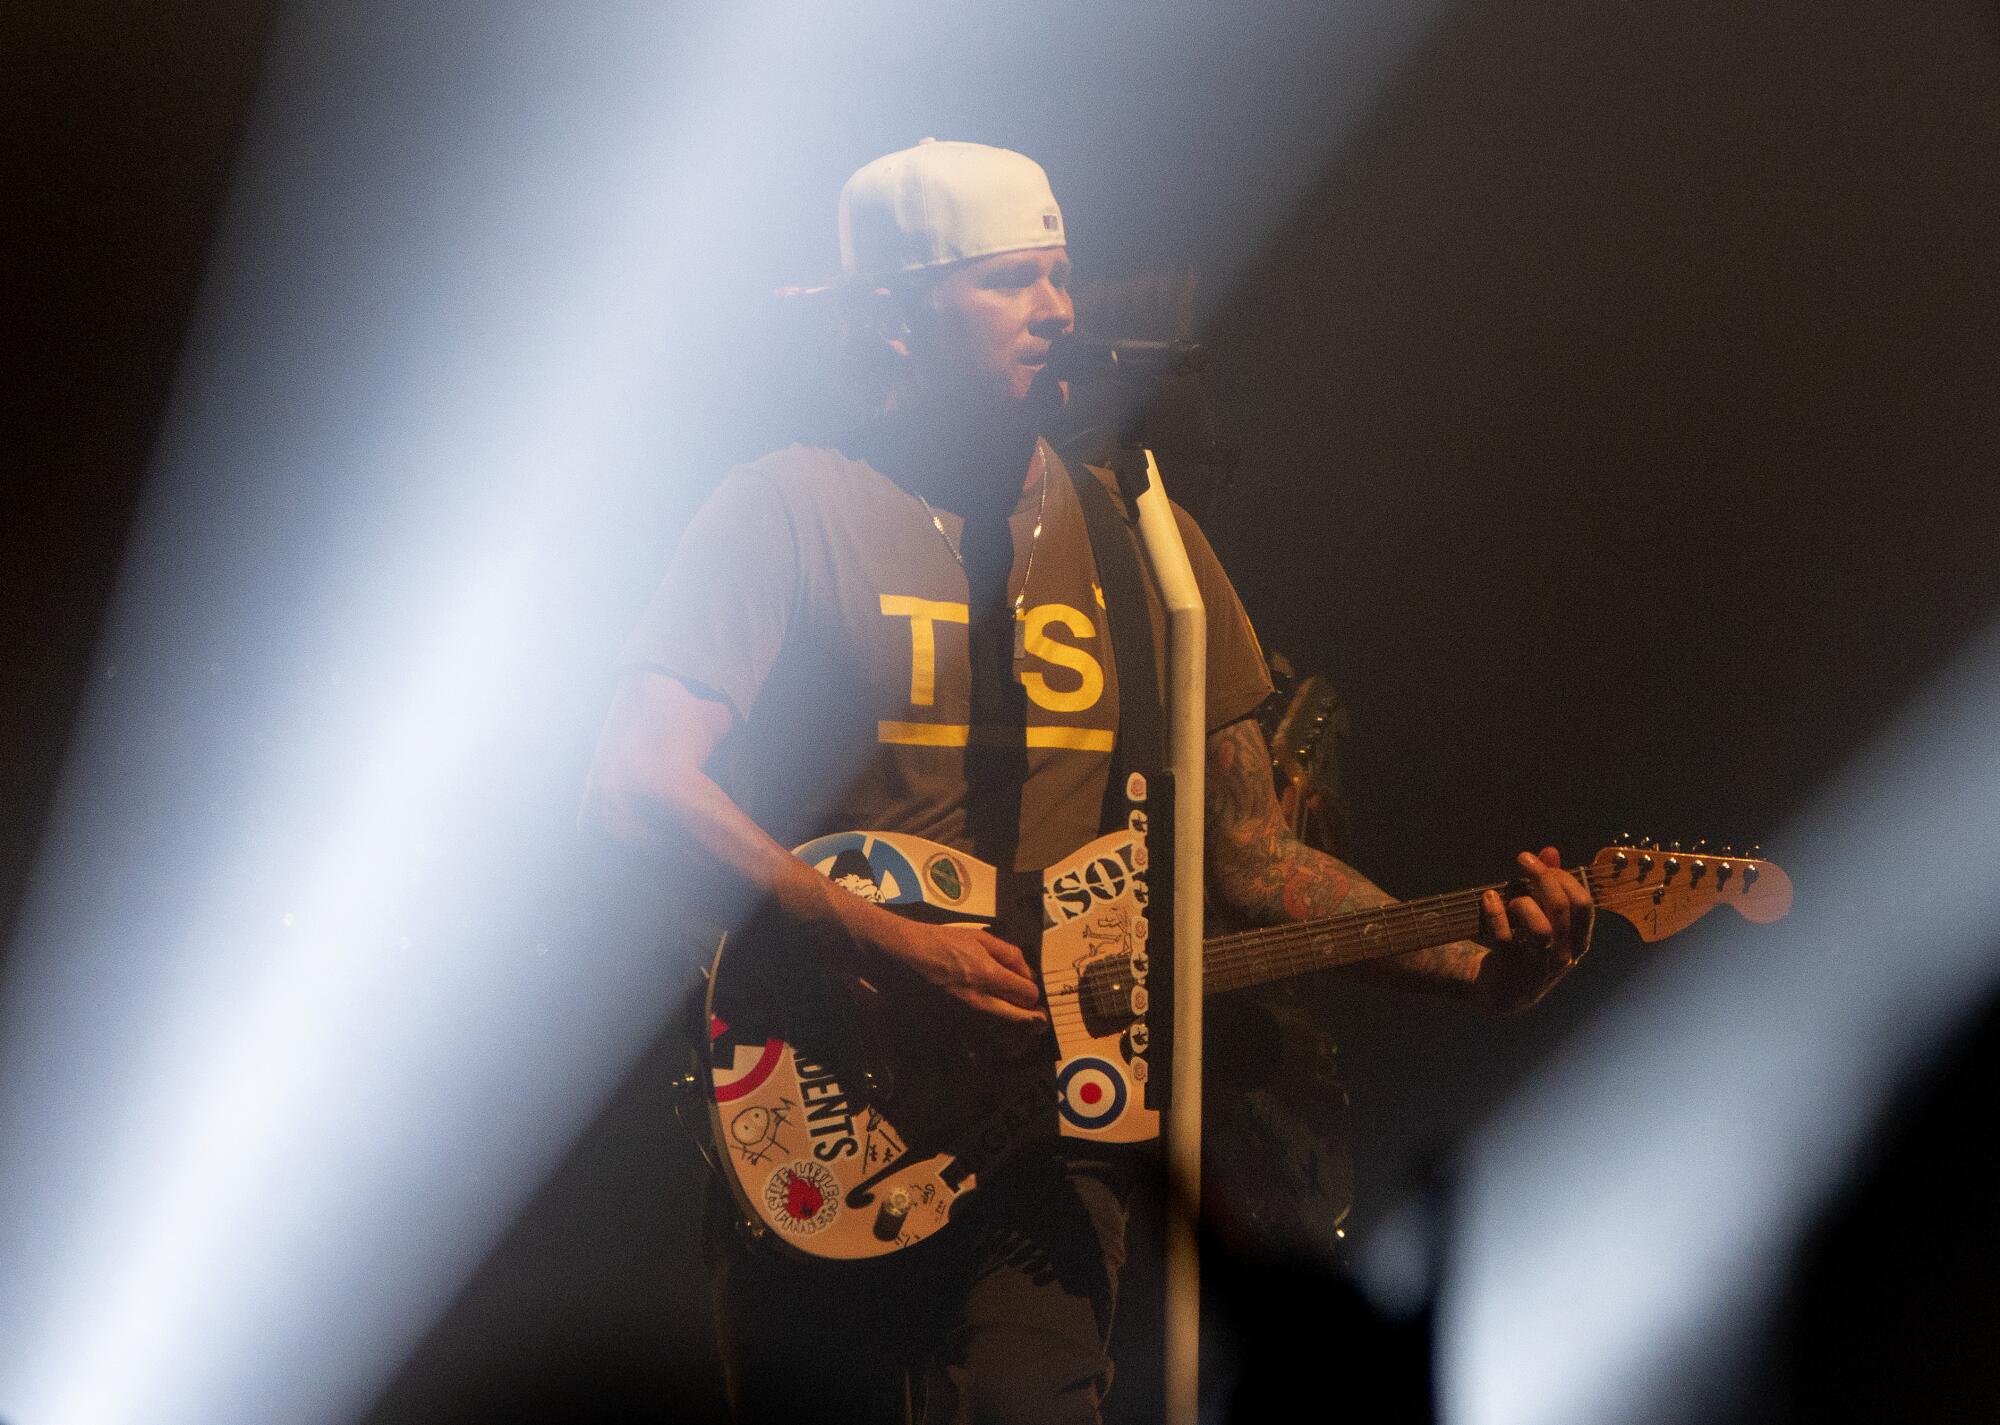 Review: Blink-182 delivers powerful concert at SAP Center in San Jose